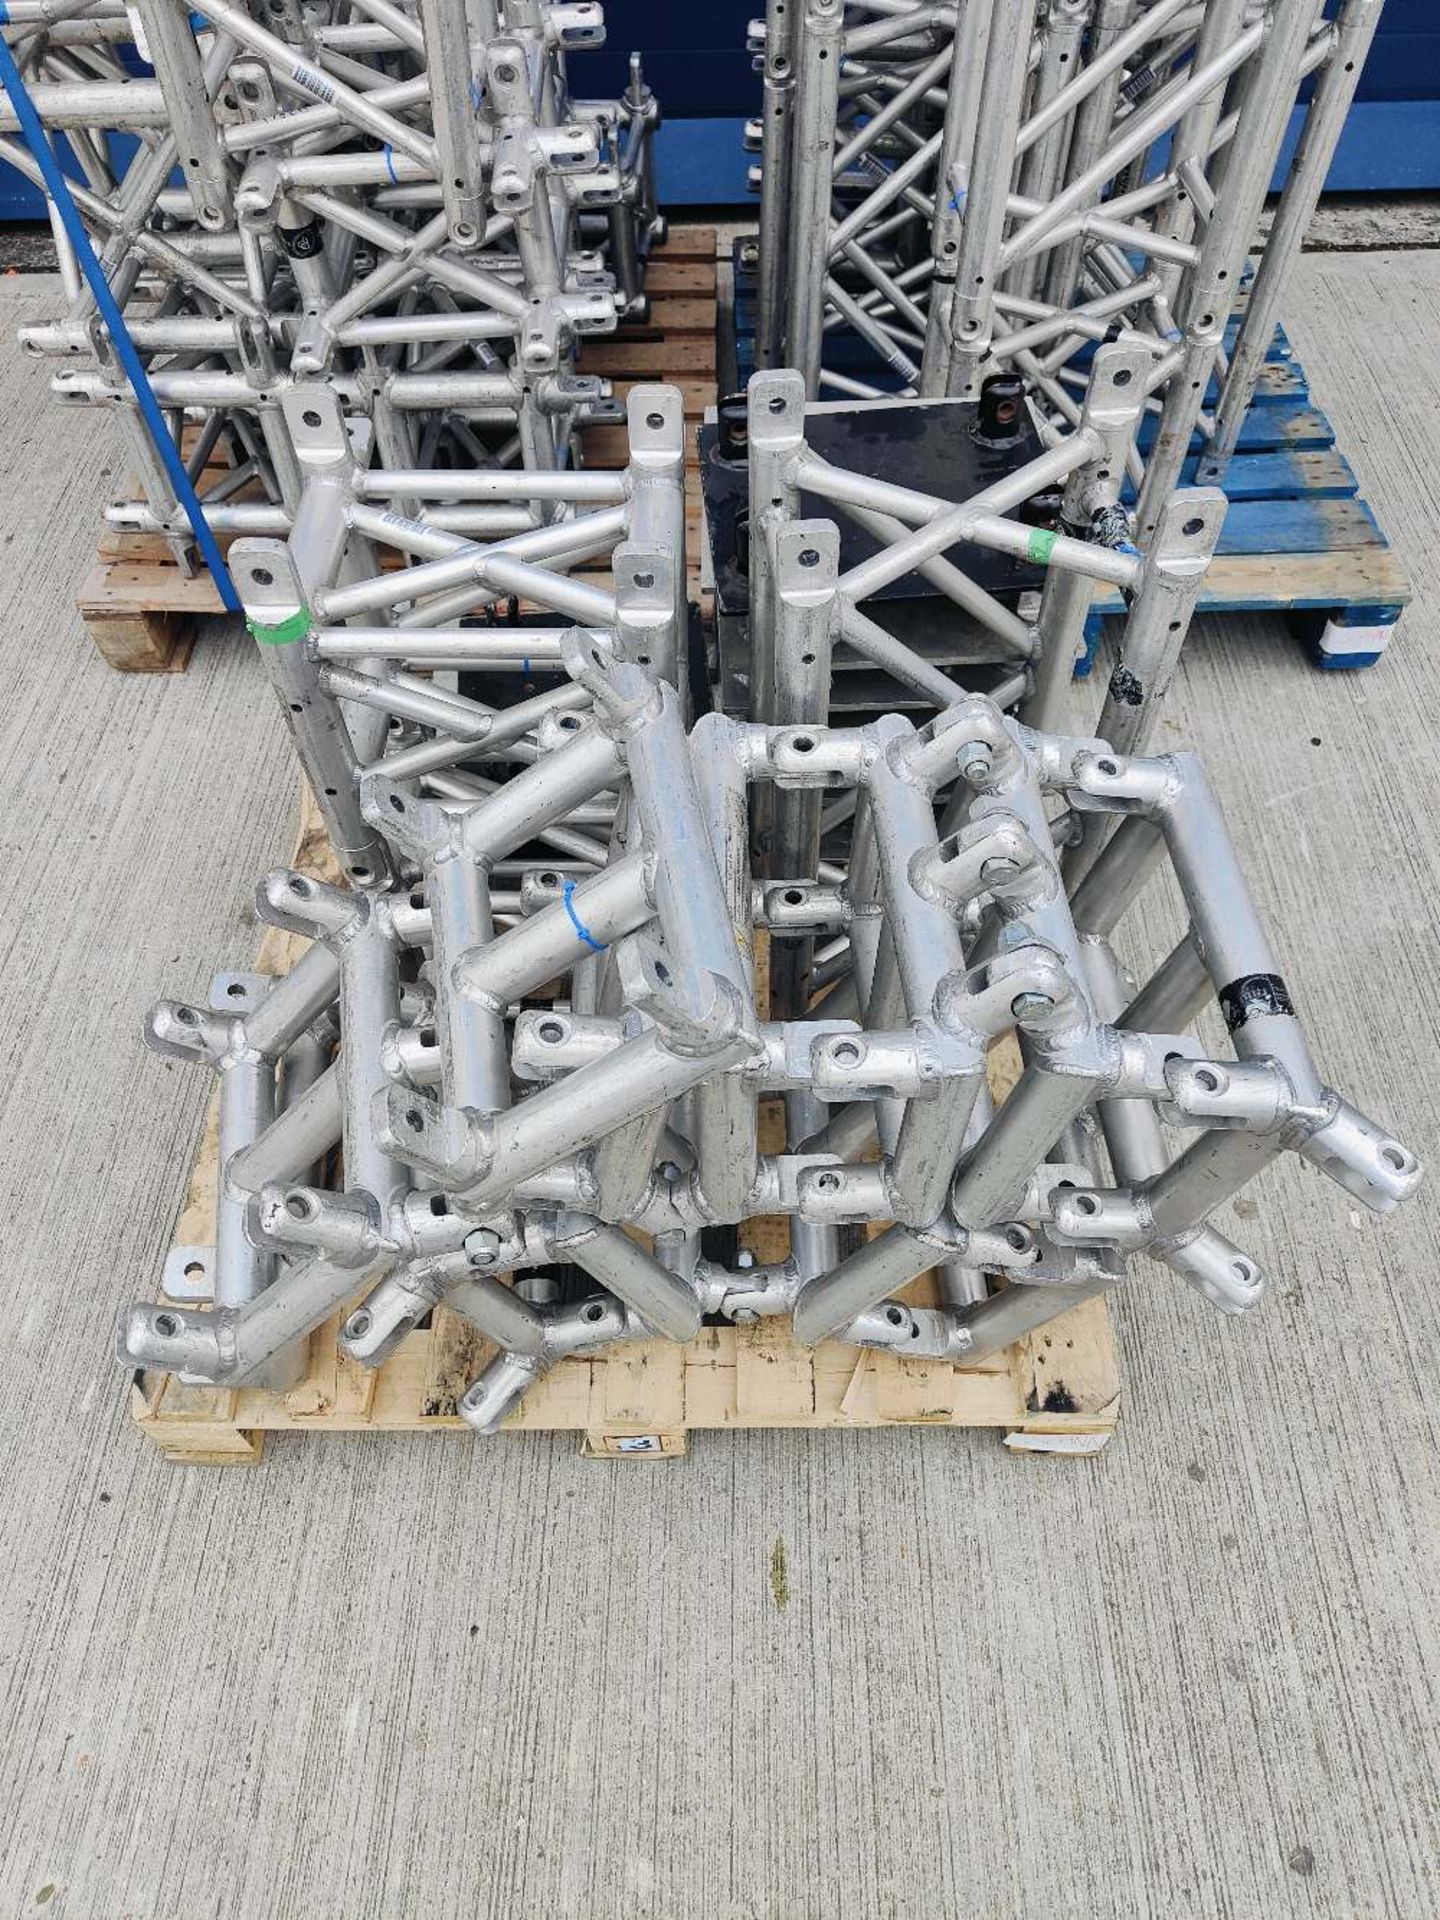 Large Quantity of Slick Minibeam Truss Sections and Base Plates - Image 8 of 8